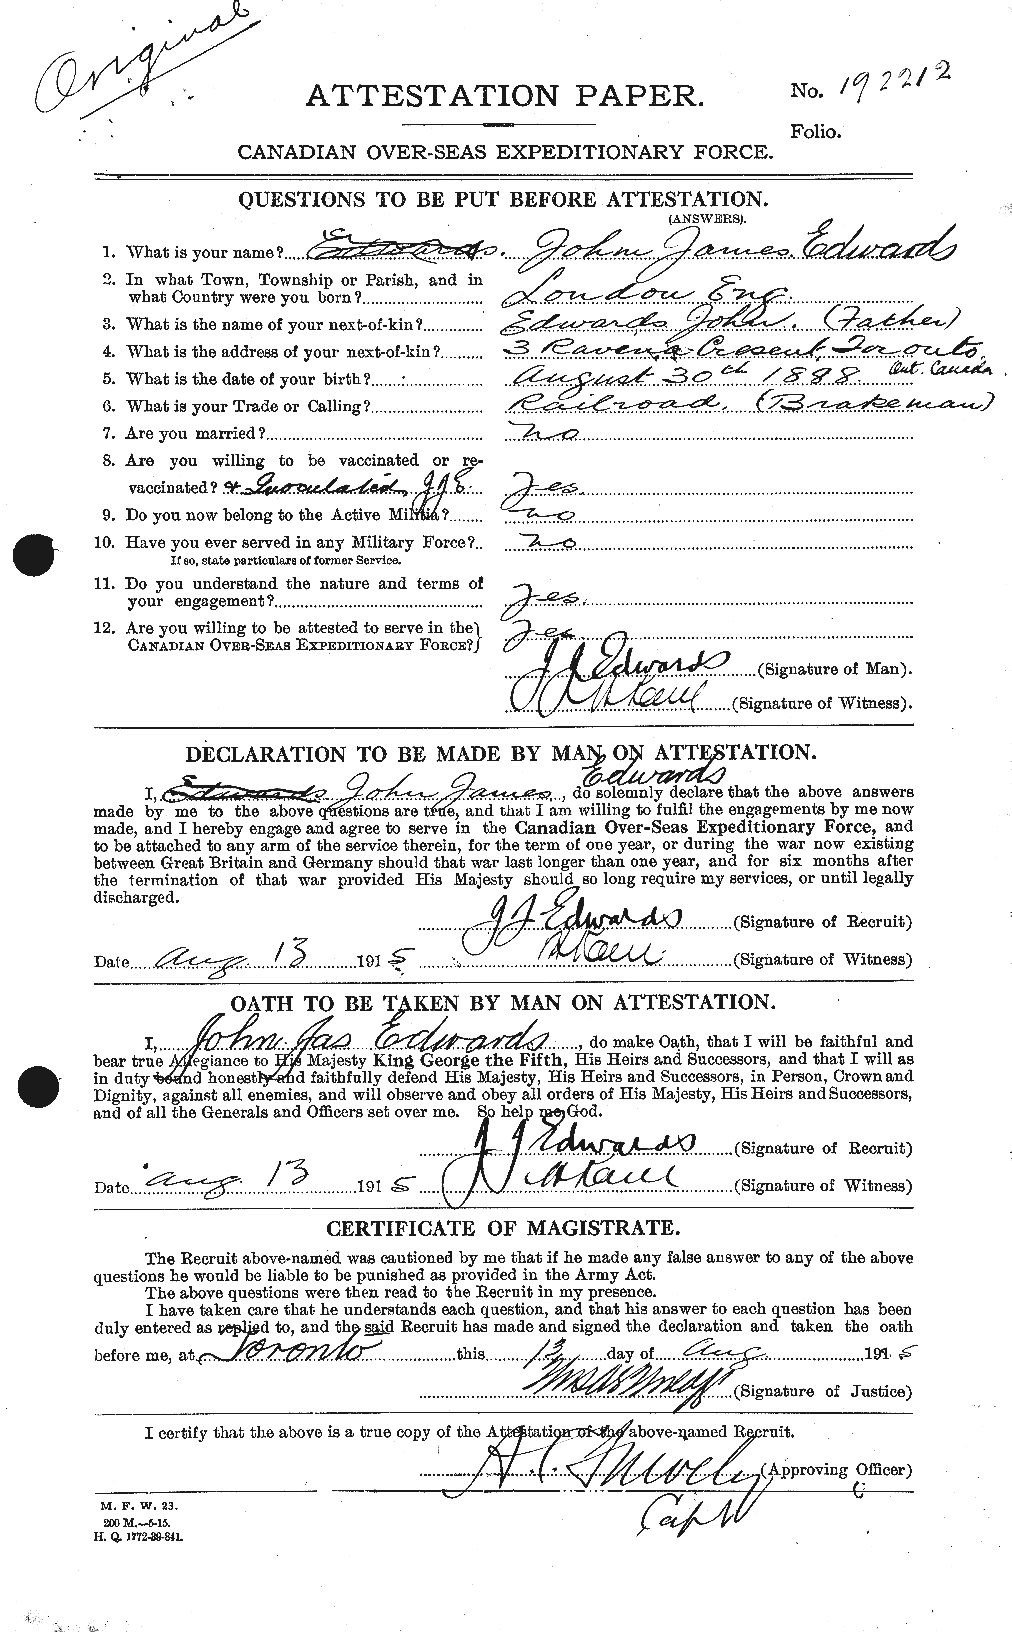 Personnel Records of the First World War - CEF 310138a